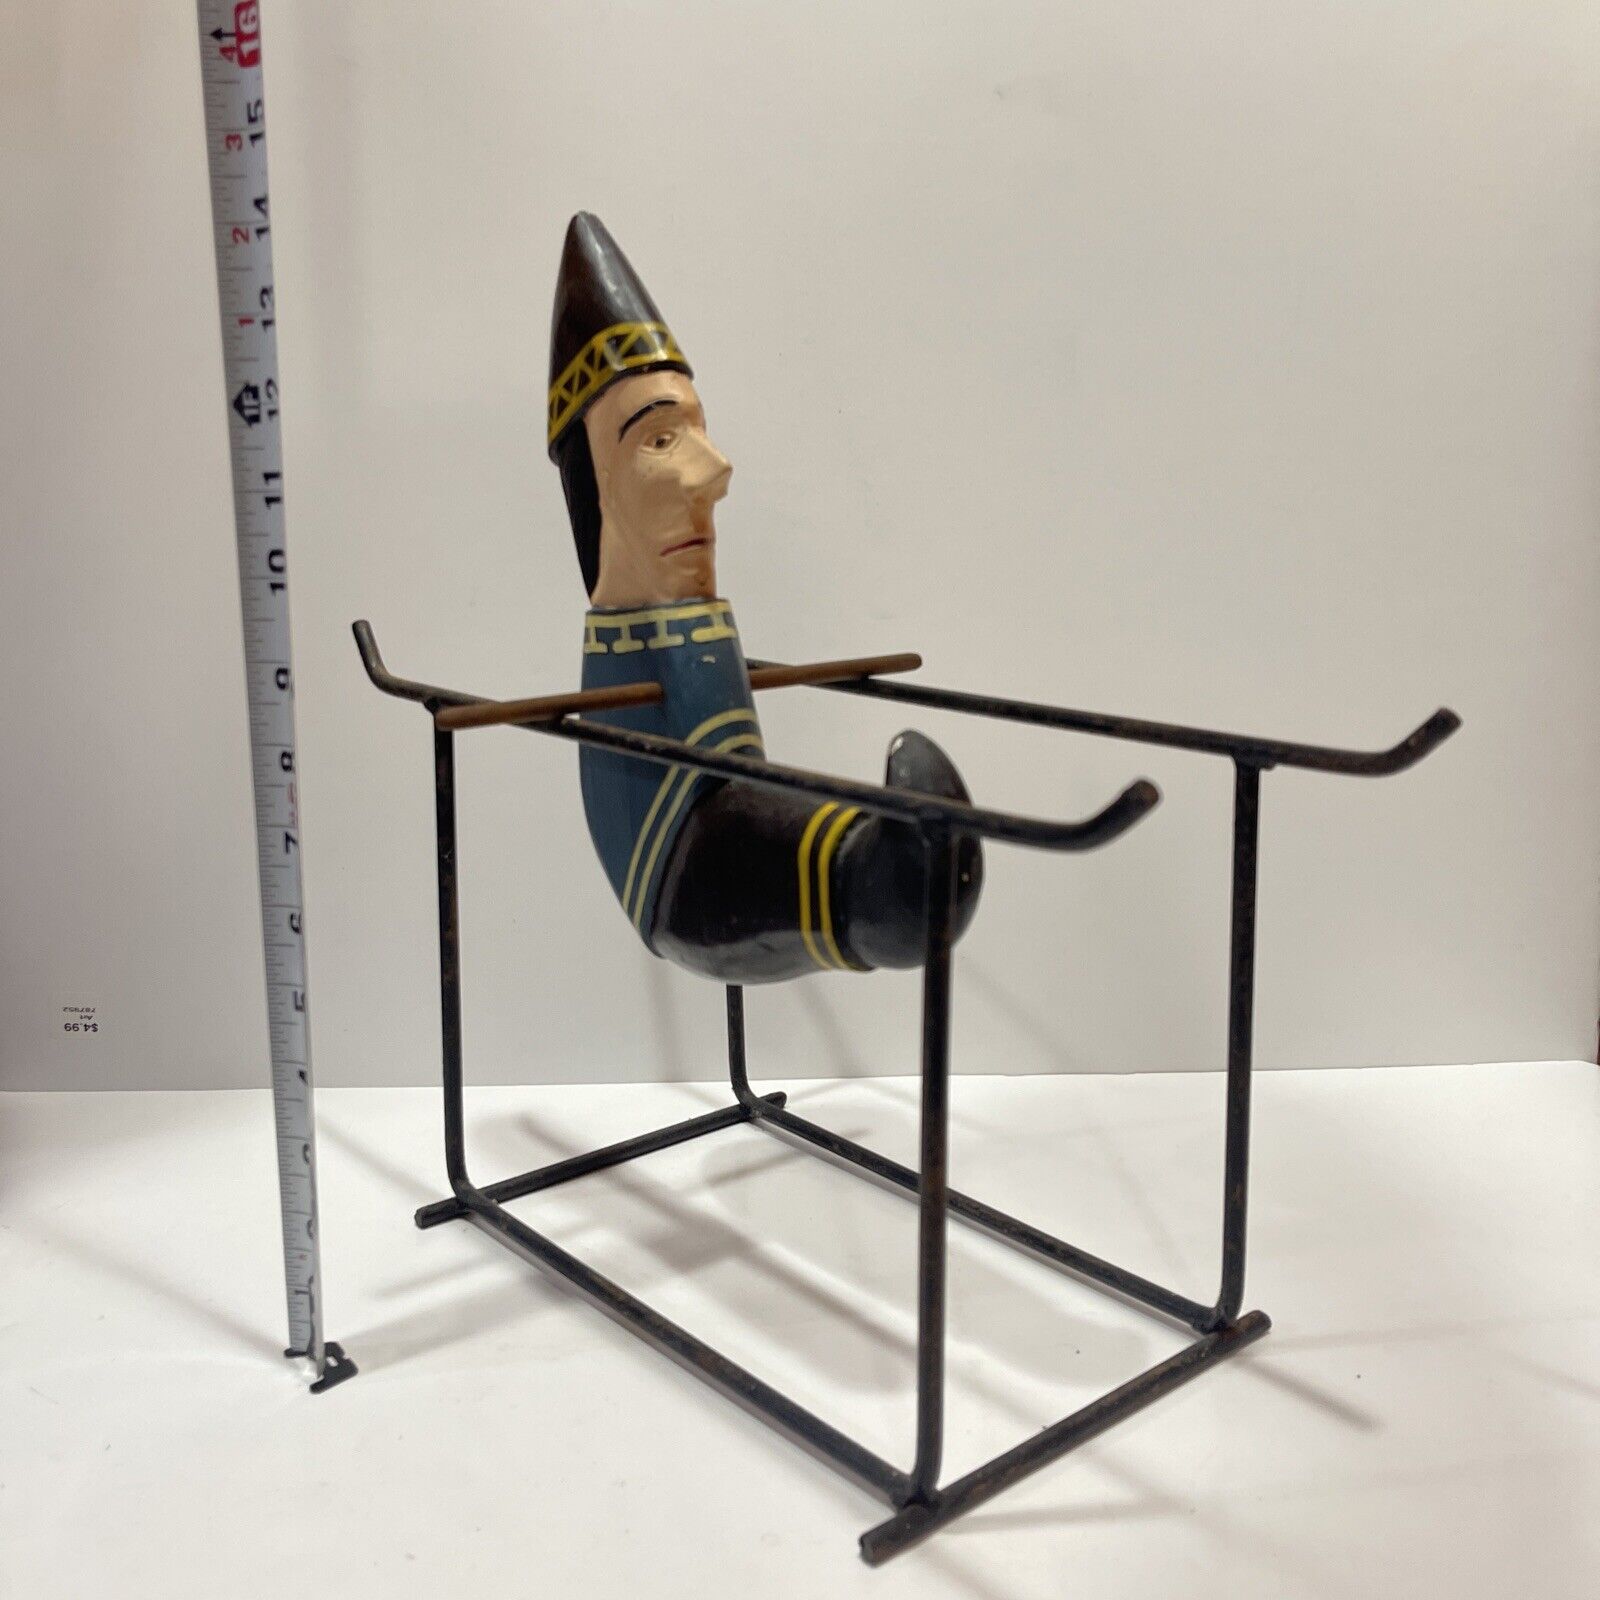 Antique Rare German Hand Carved Painted Wood Circus Balancing Toy Folk Art 15”